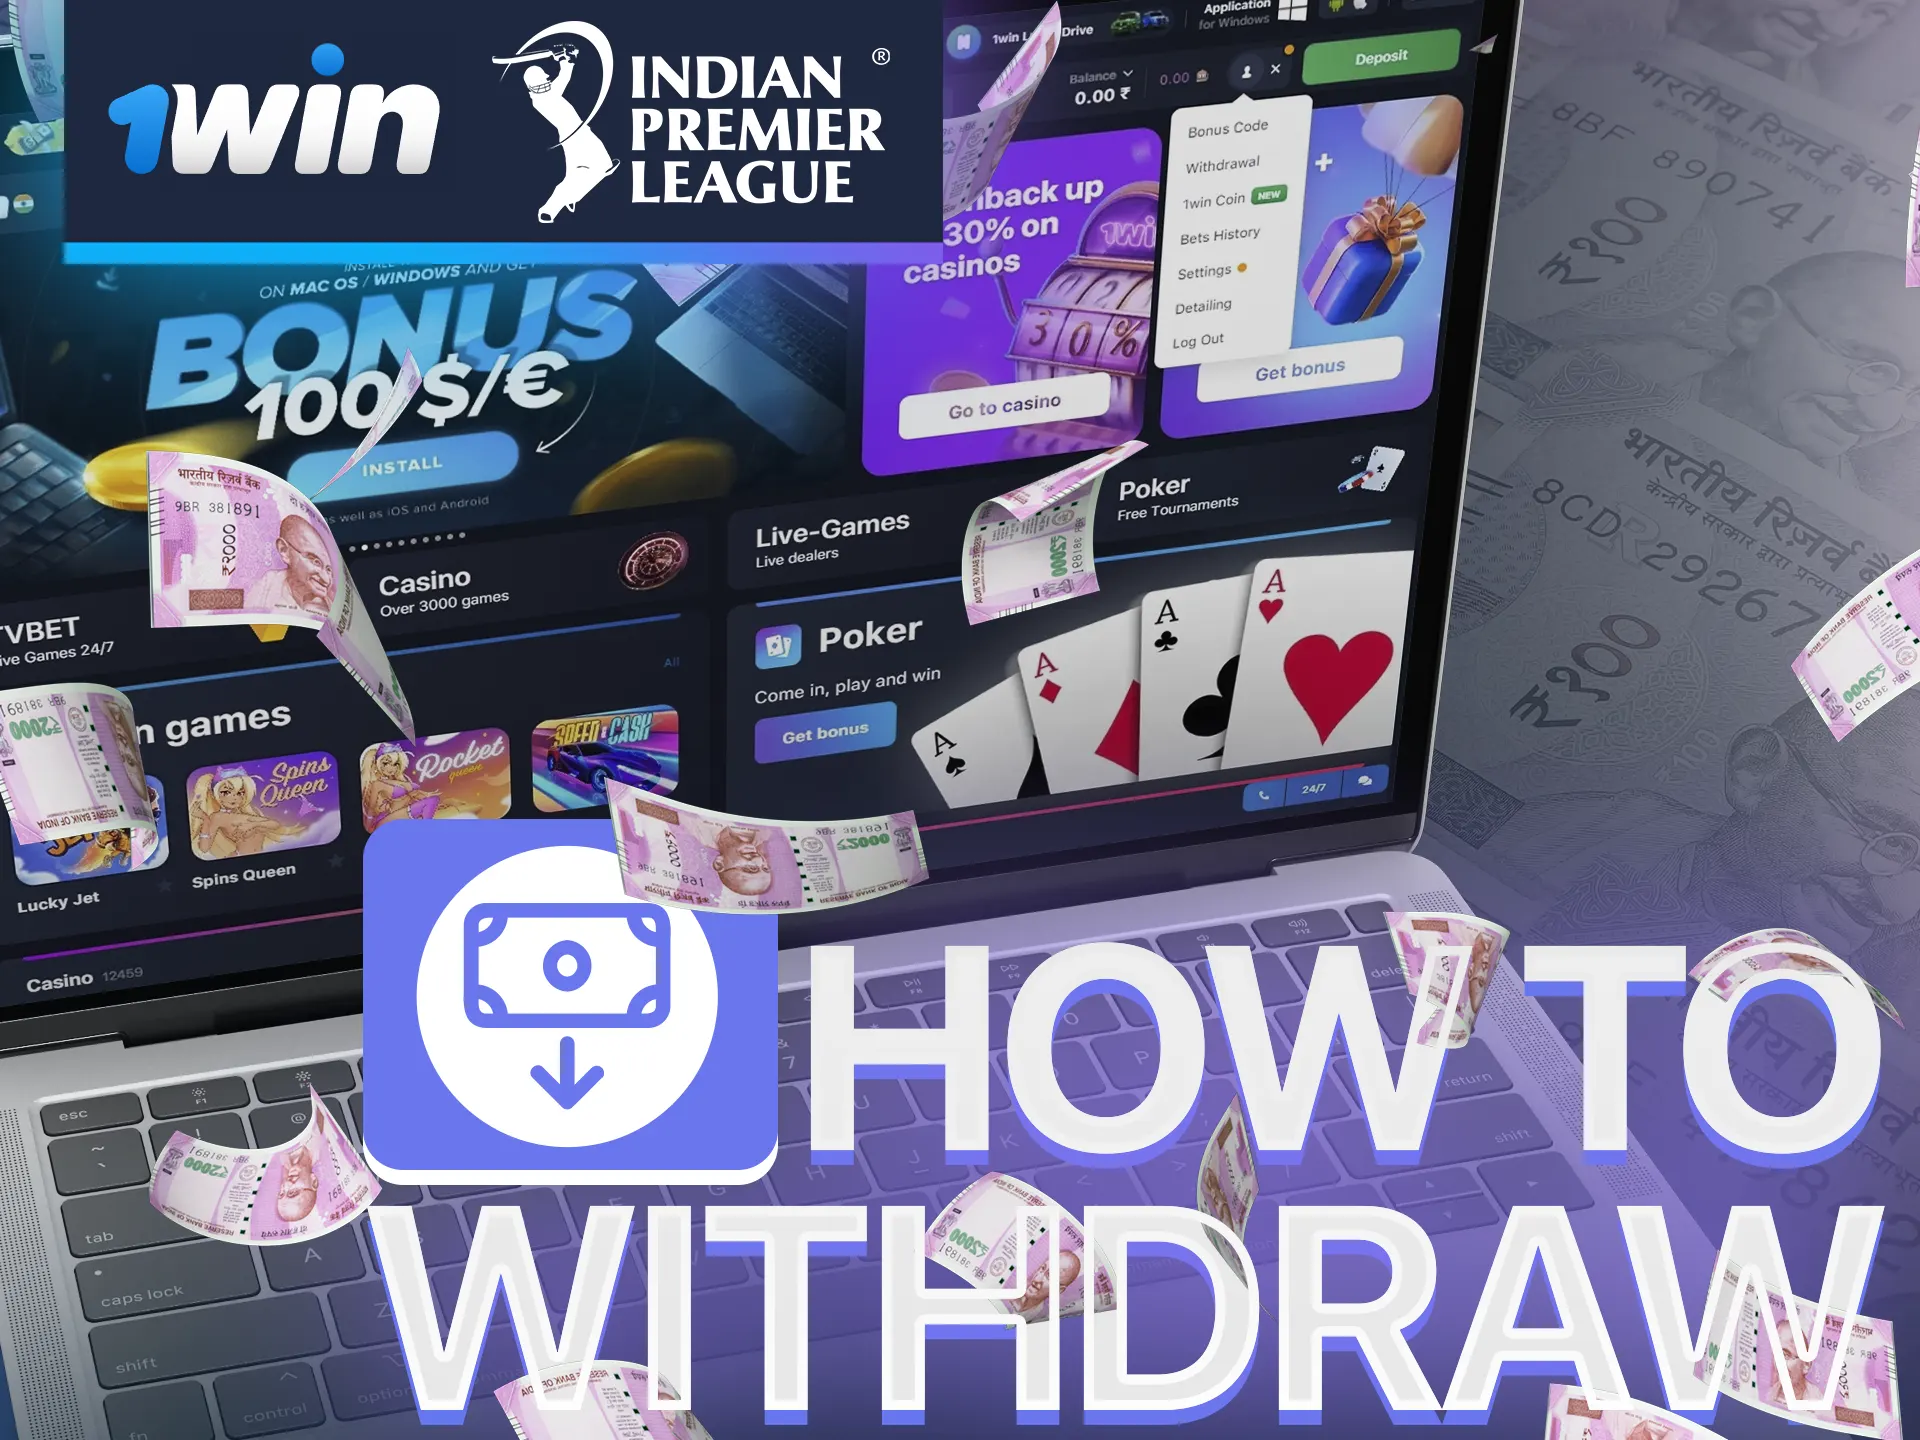 Withdraw winnings from IPL betting on 1Win easily.